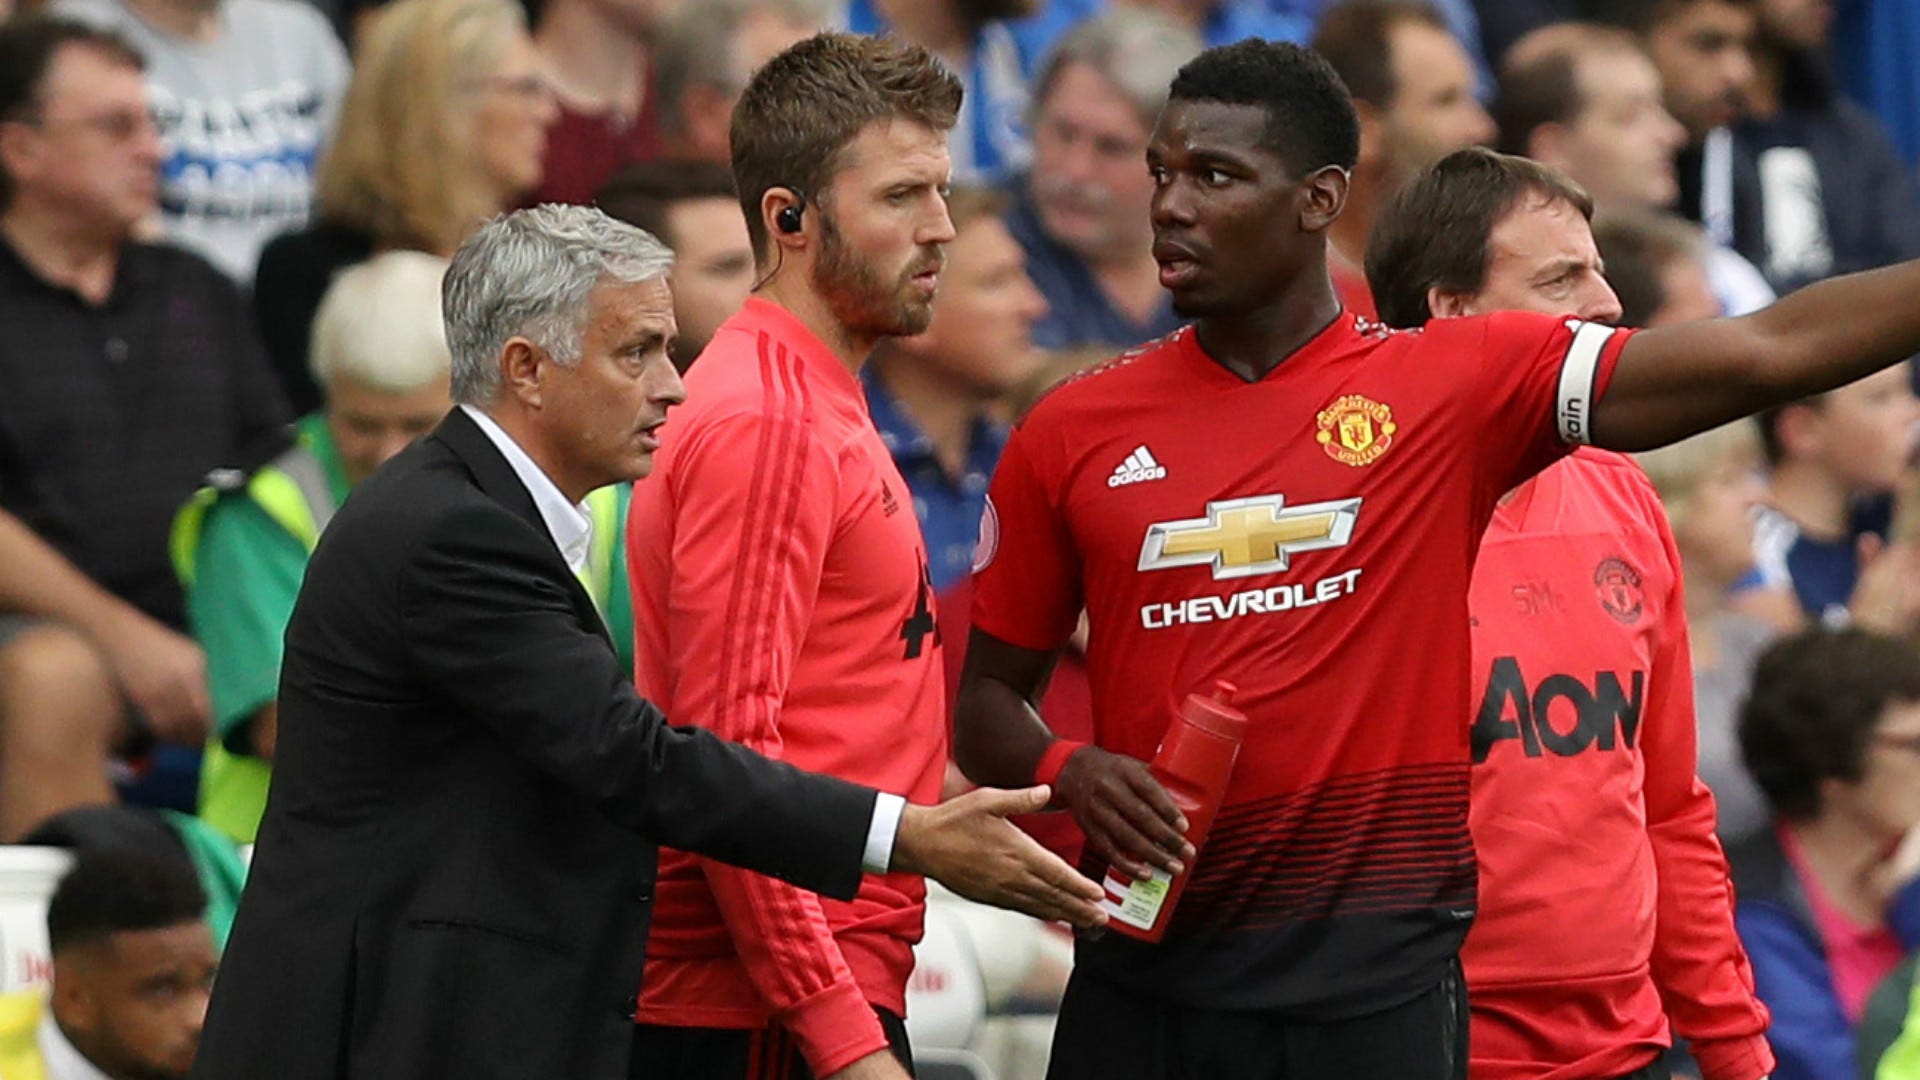 Paul Pogba - Jose Mourinho feud: Both player and manager could leave